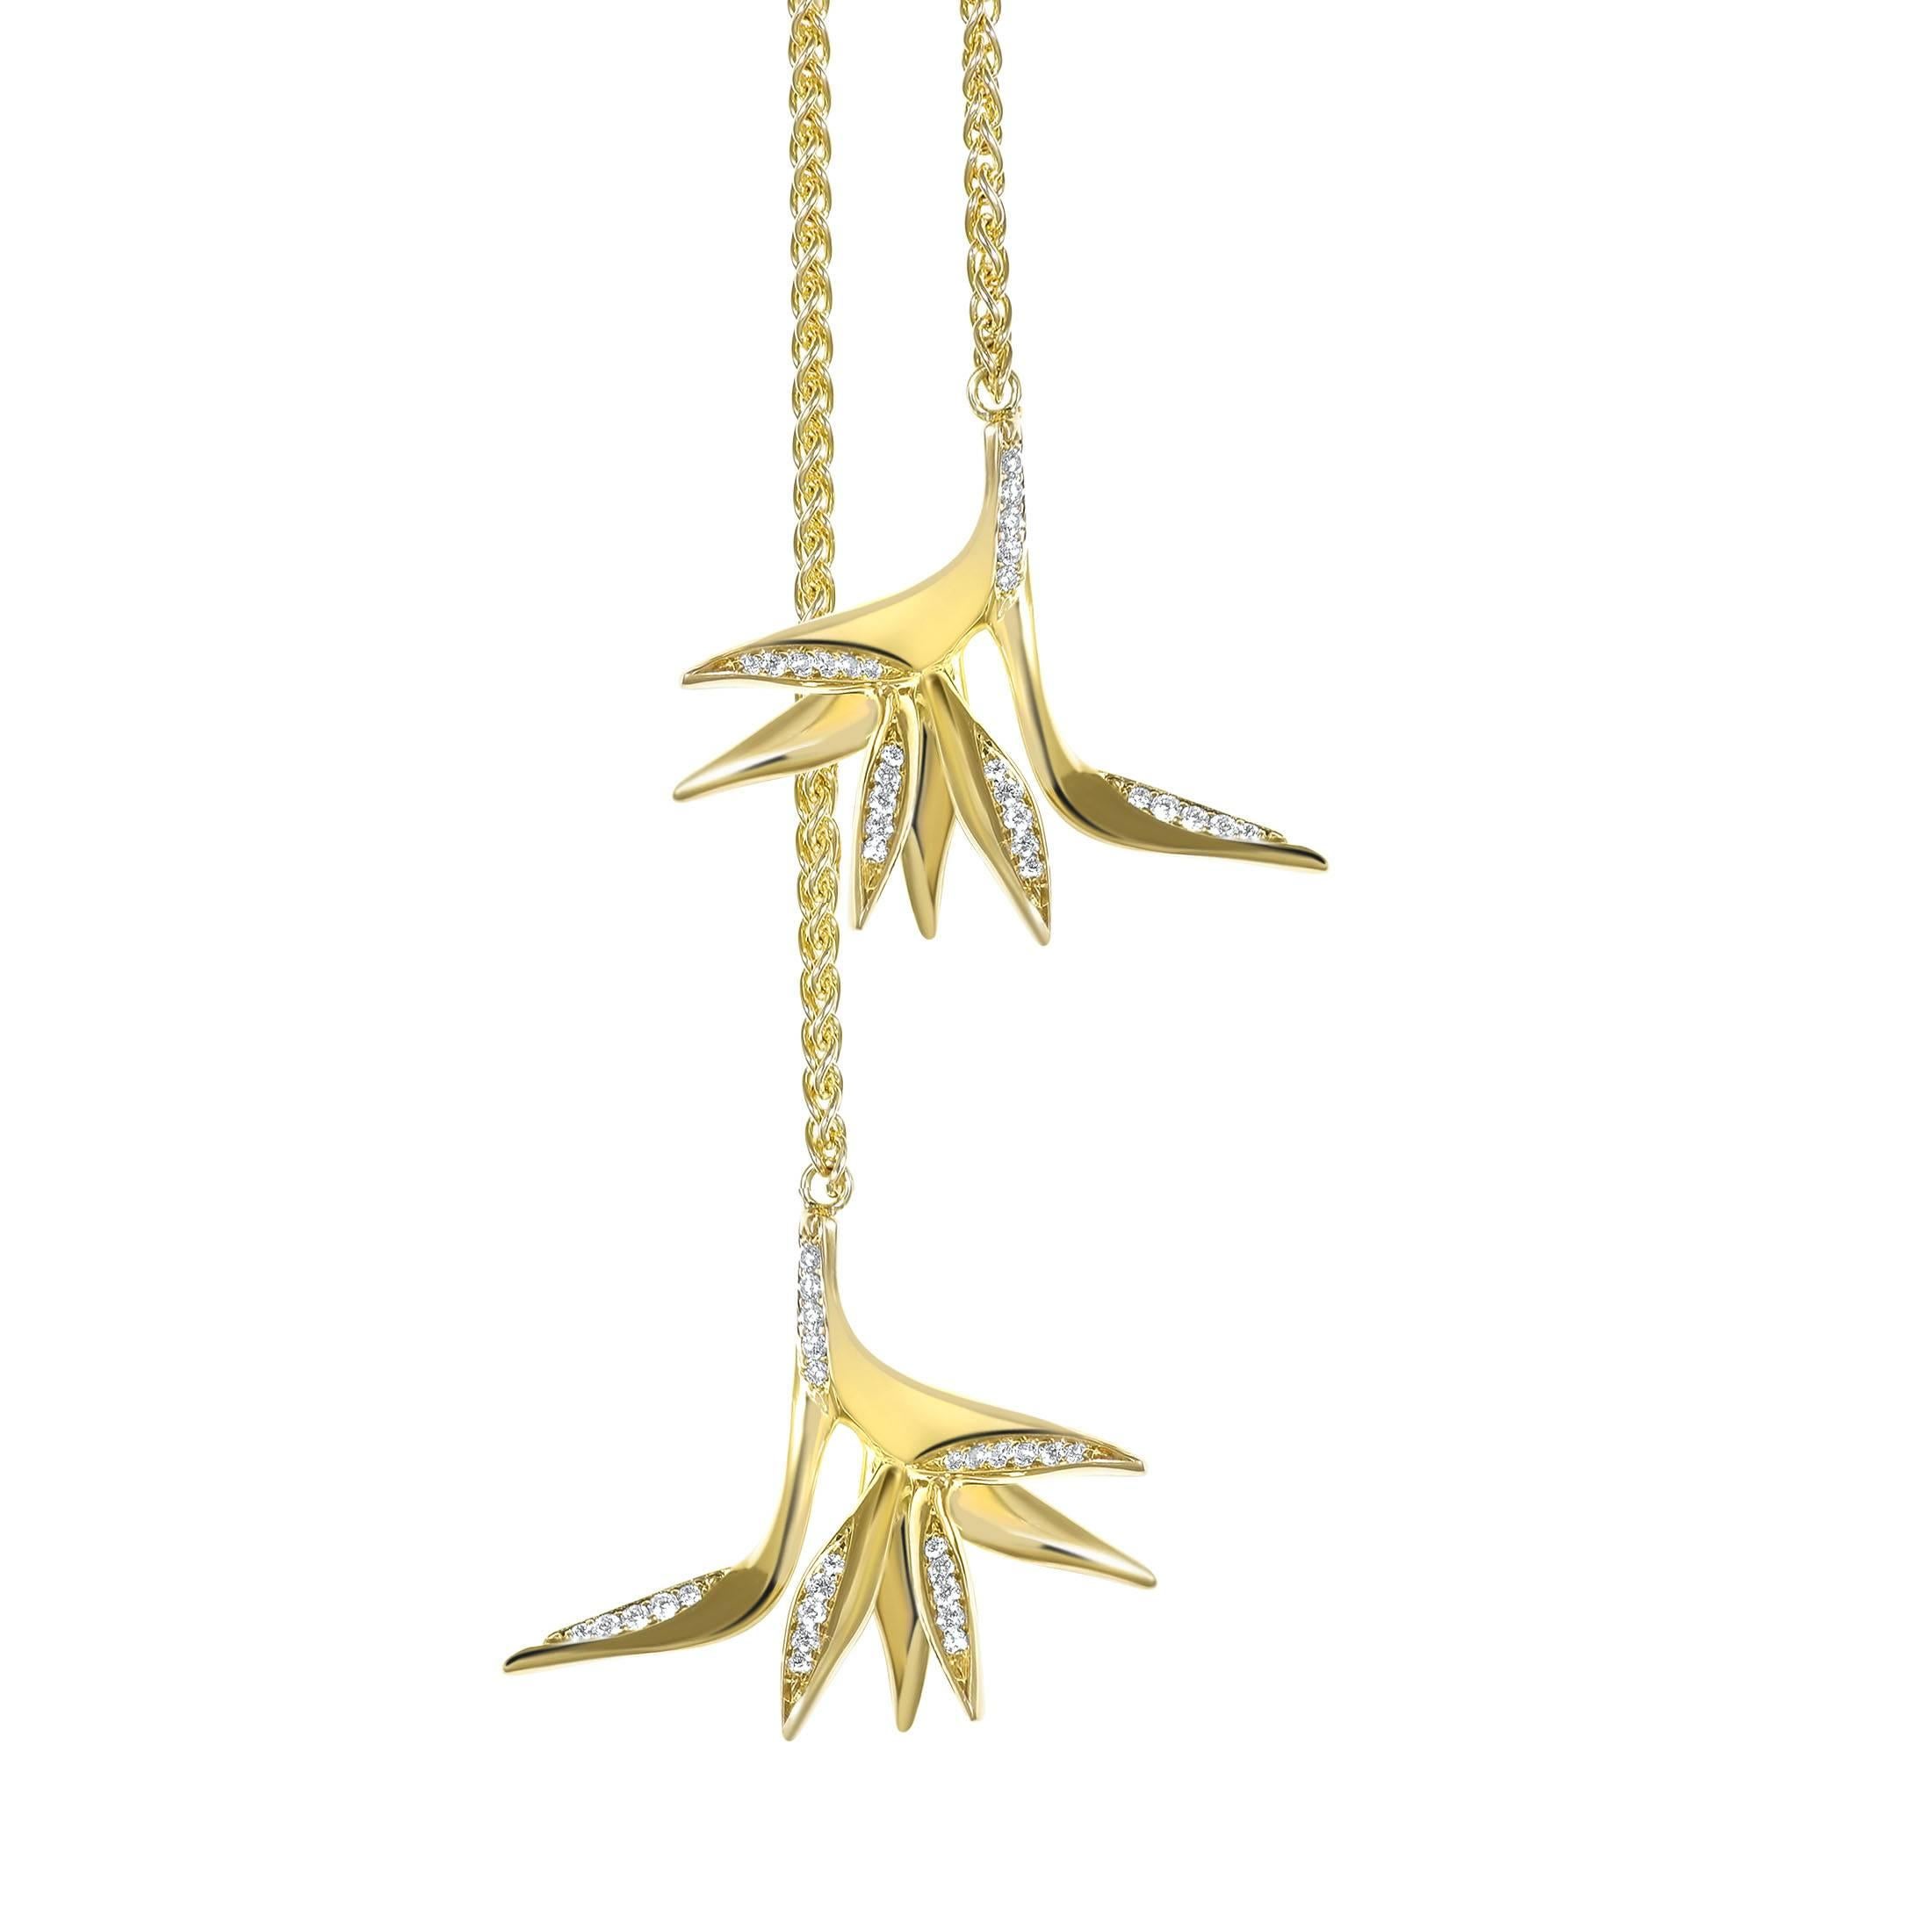 The Bird of Paradise Double Drop Necklace takes its inspiration from the long, delicate and characteristic tail feathers of the Bird of Paradise. Featuring 0.14 tct pavé-set diamonds set in 18k Fairtrade gold. 80 cm. 
